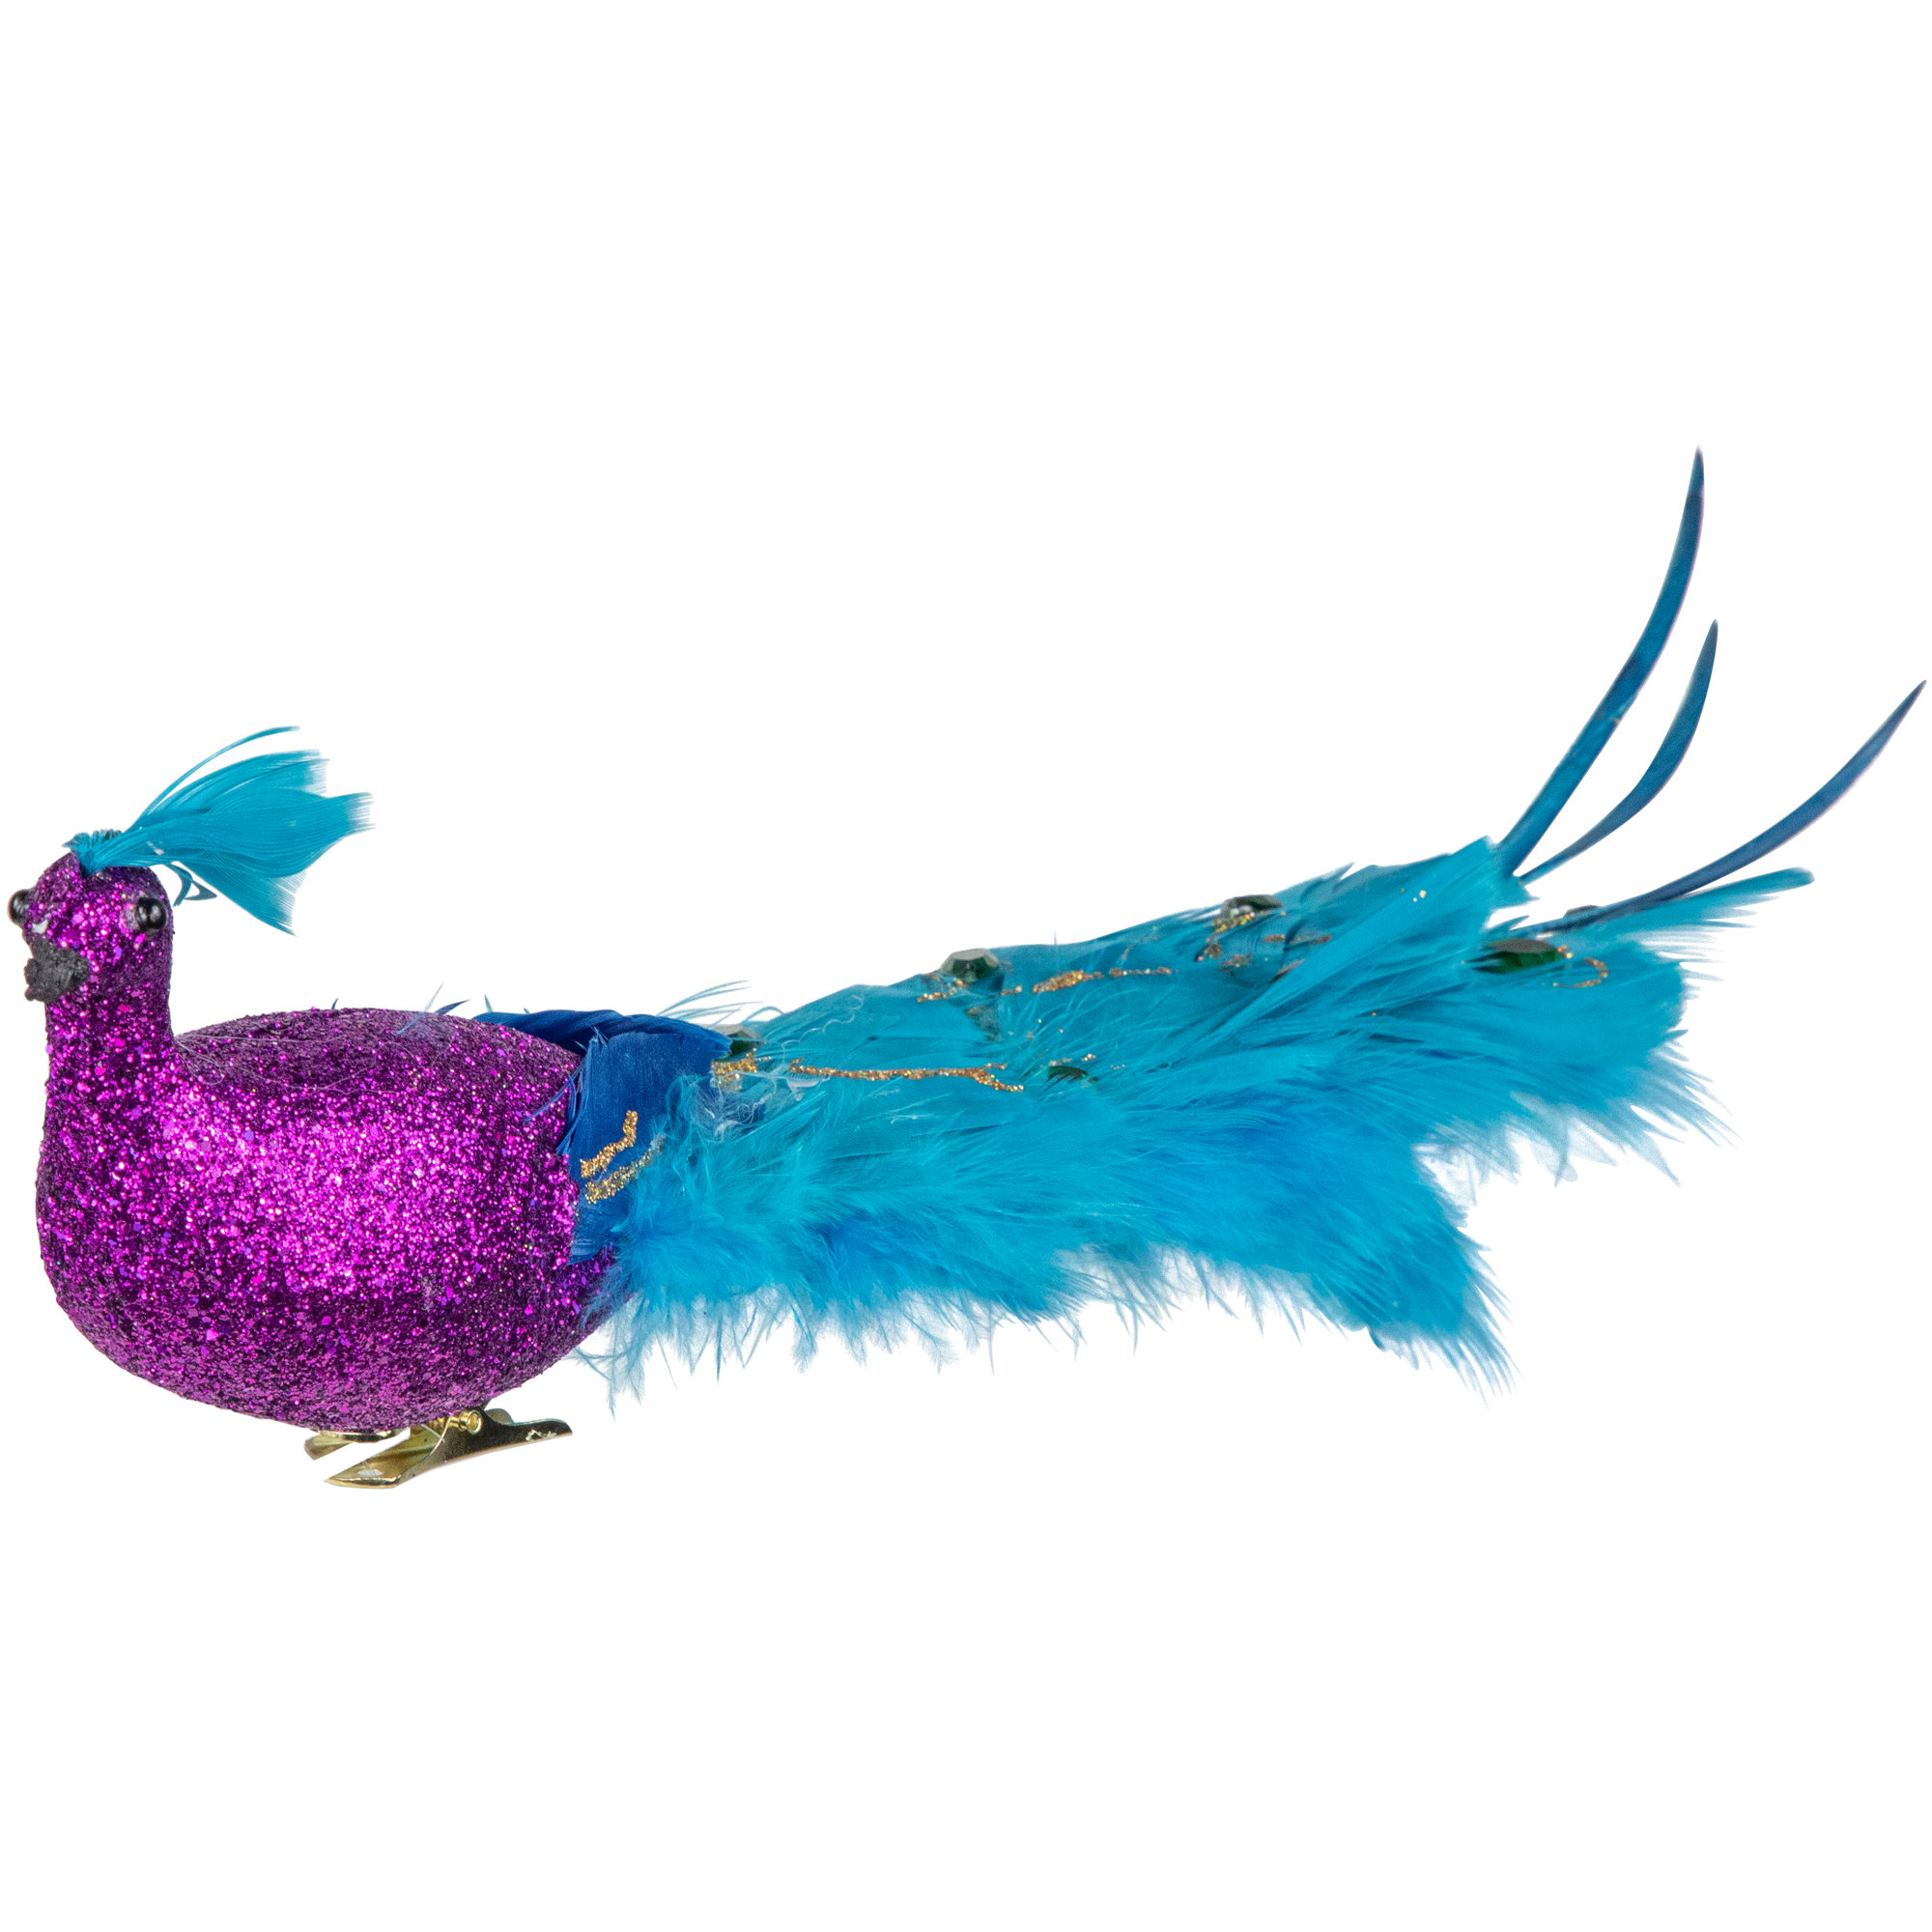 Peacock Decor Christmas Ornaments Artificial Peacock Feather Cilp Ornament  Faux Glitter Blue Peacock with Long Tail Crafts Bulk Christmas Decorations